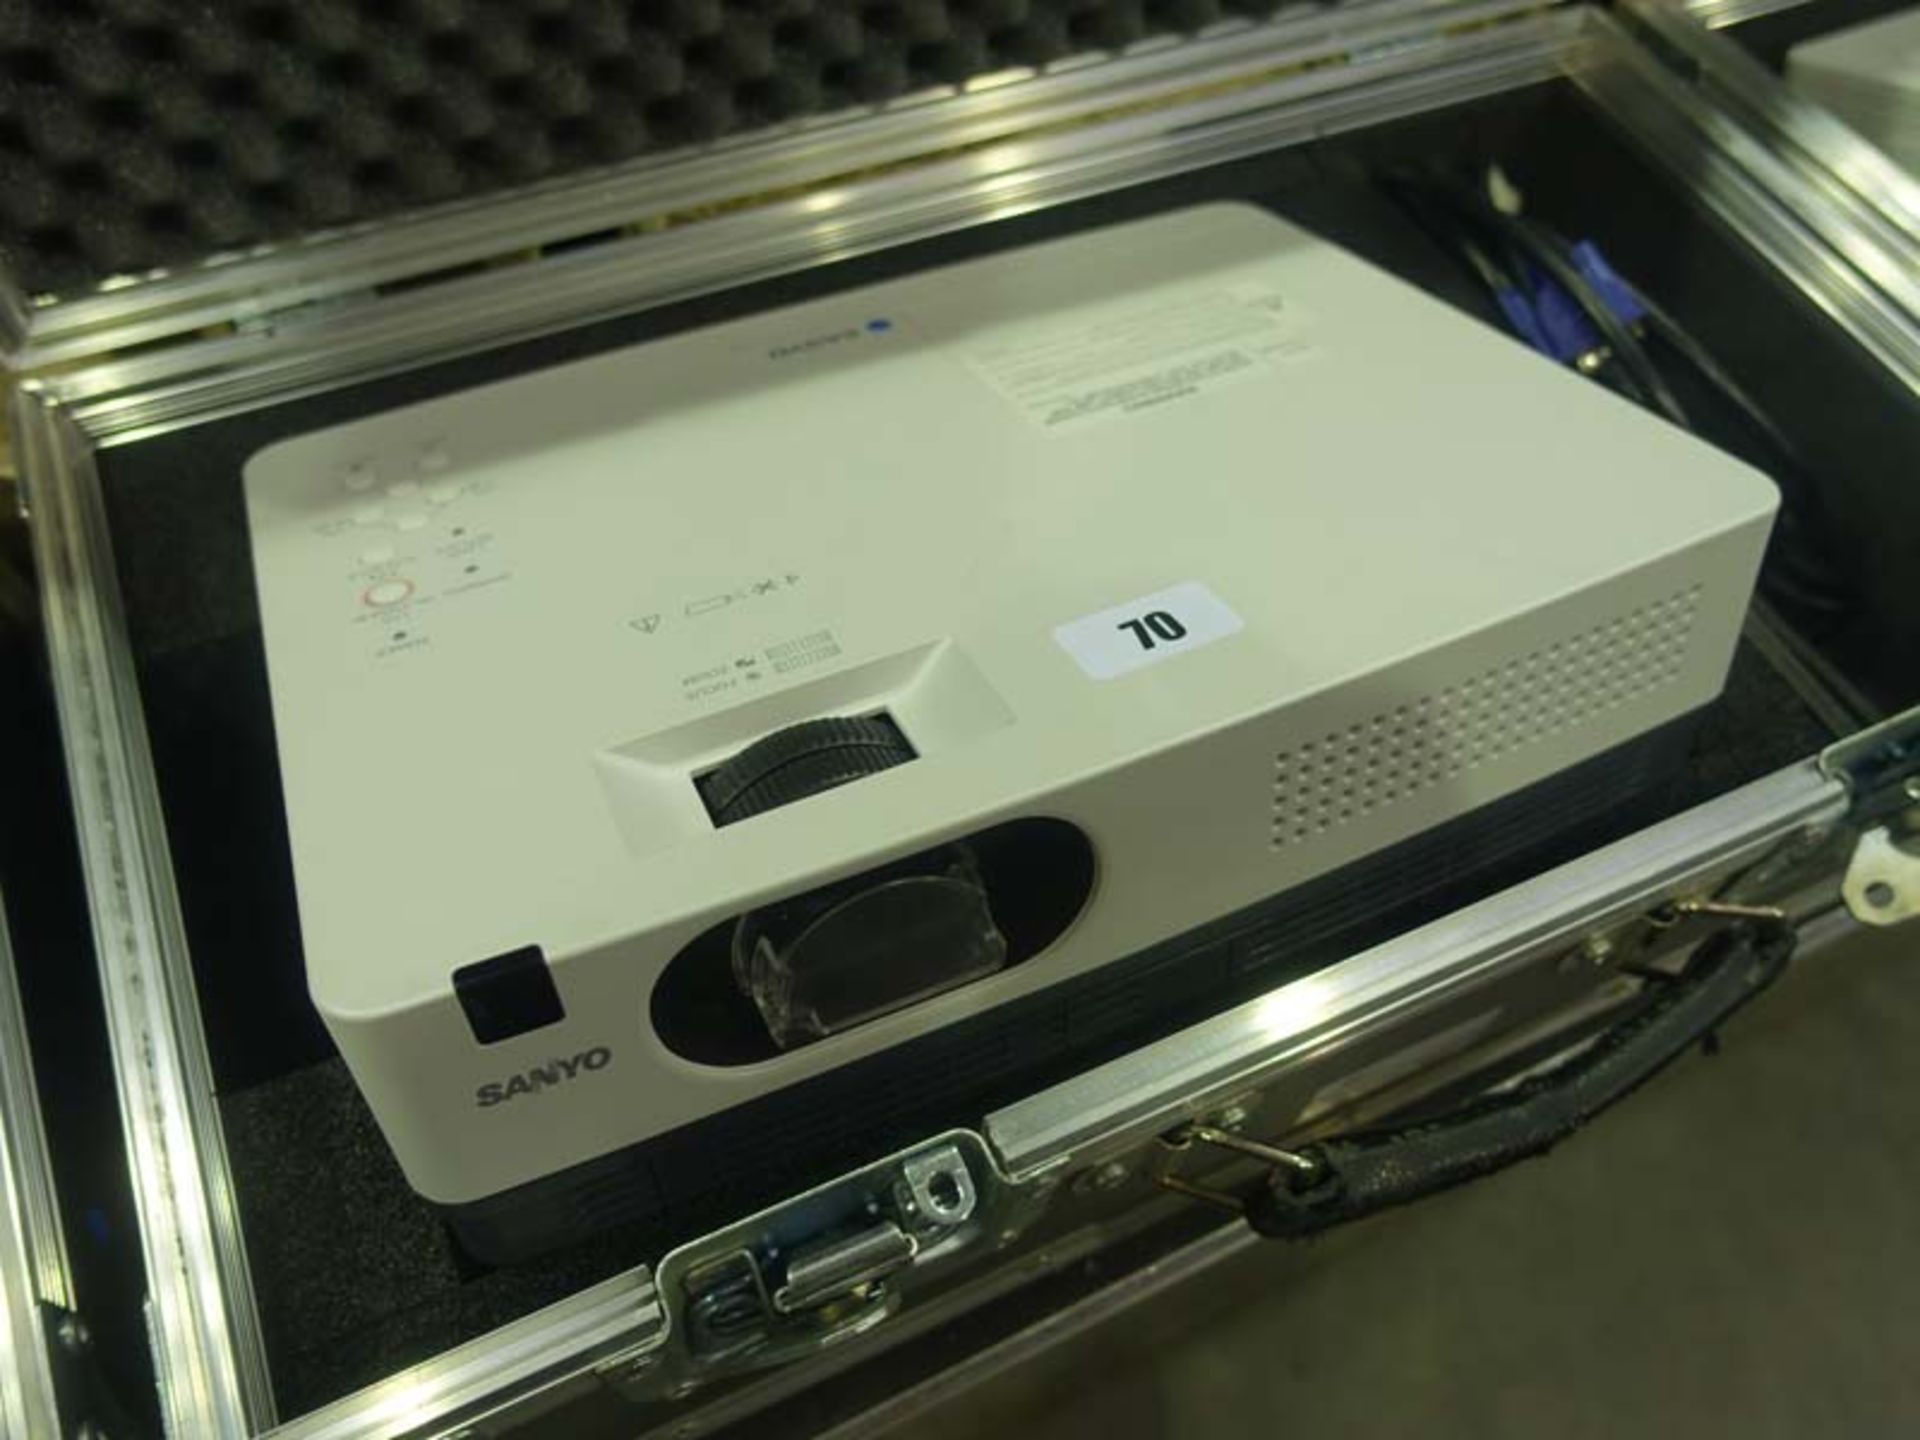 Sanyo model PLCXW200 XGA projector with accessories and case